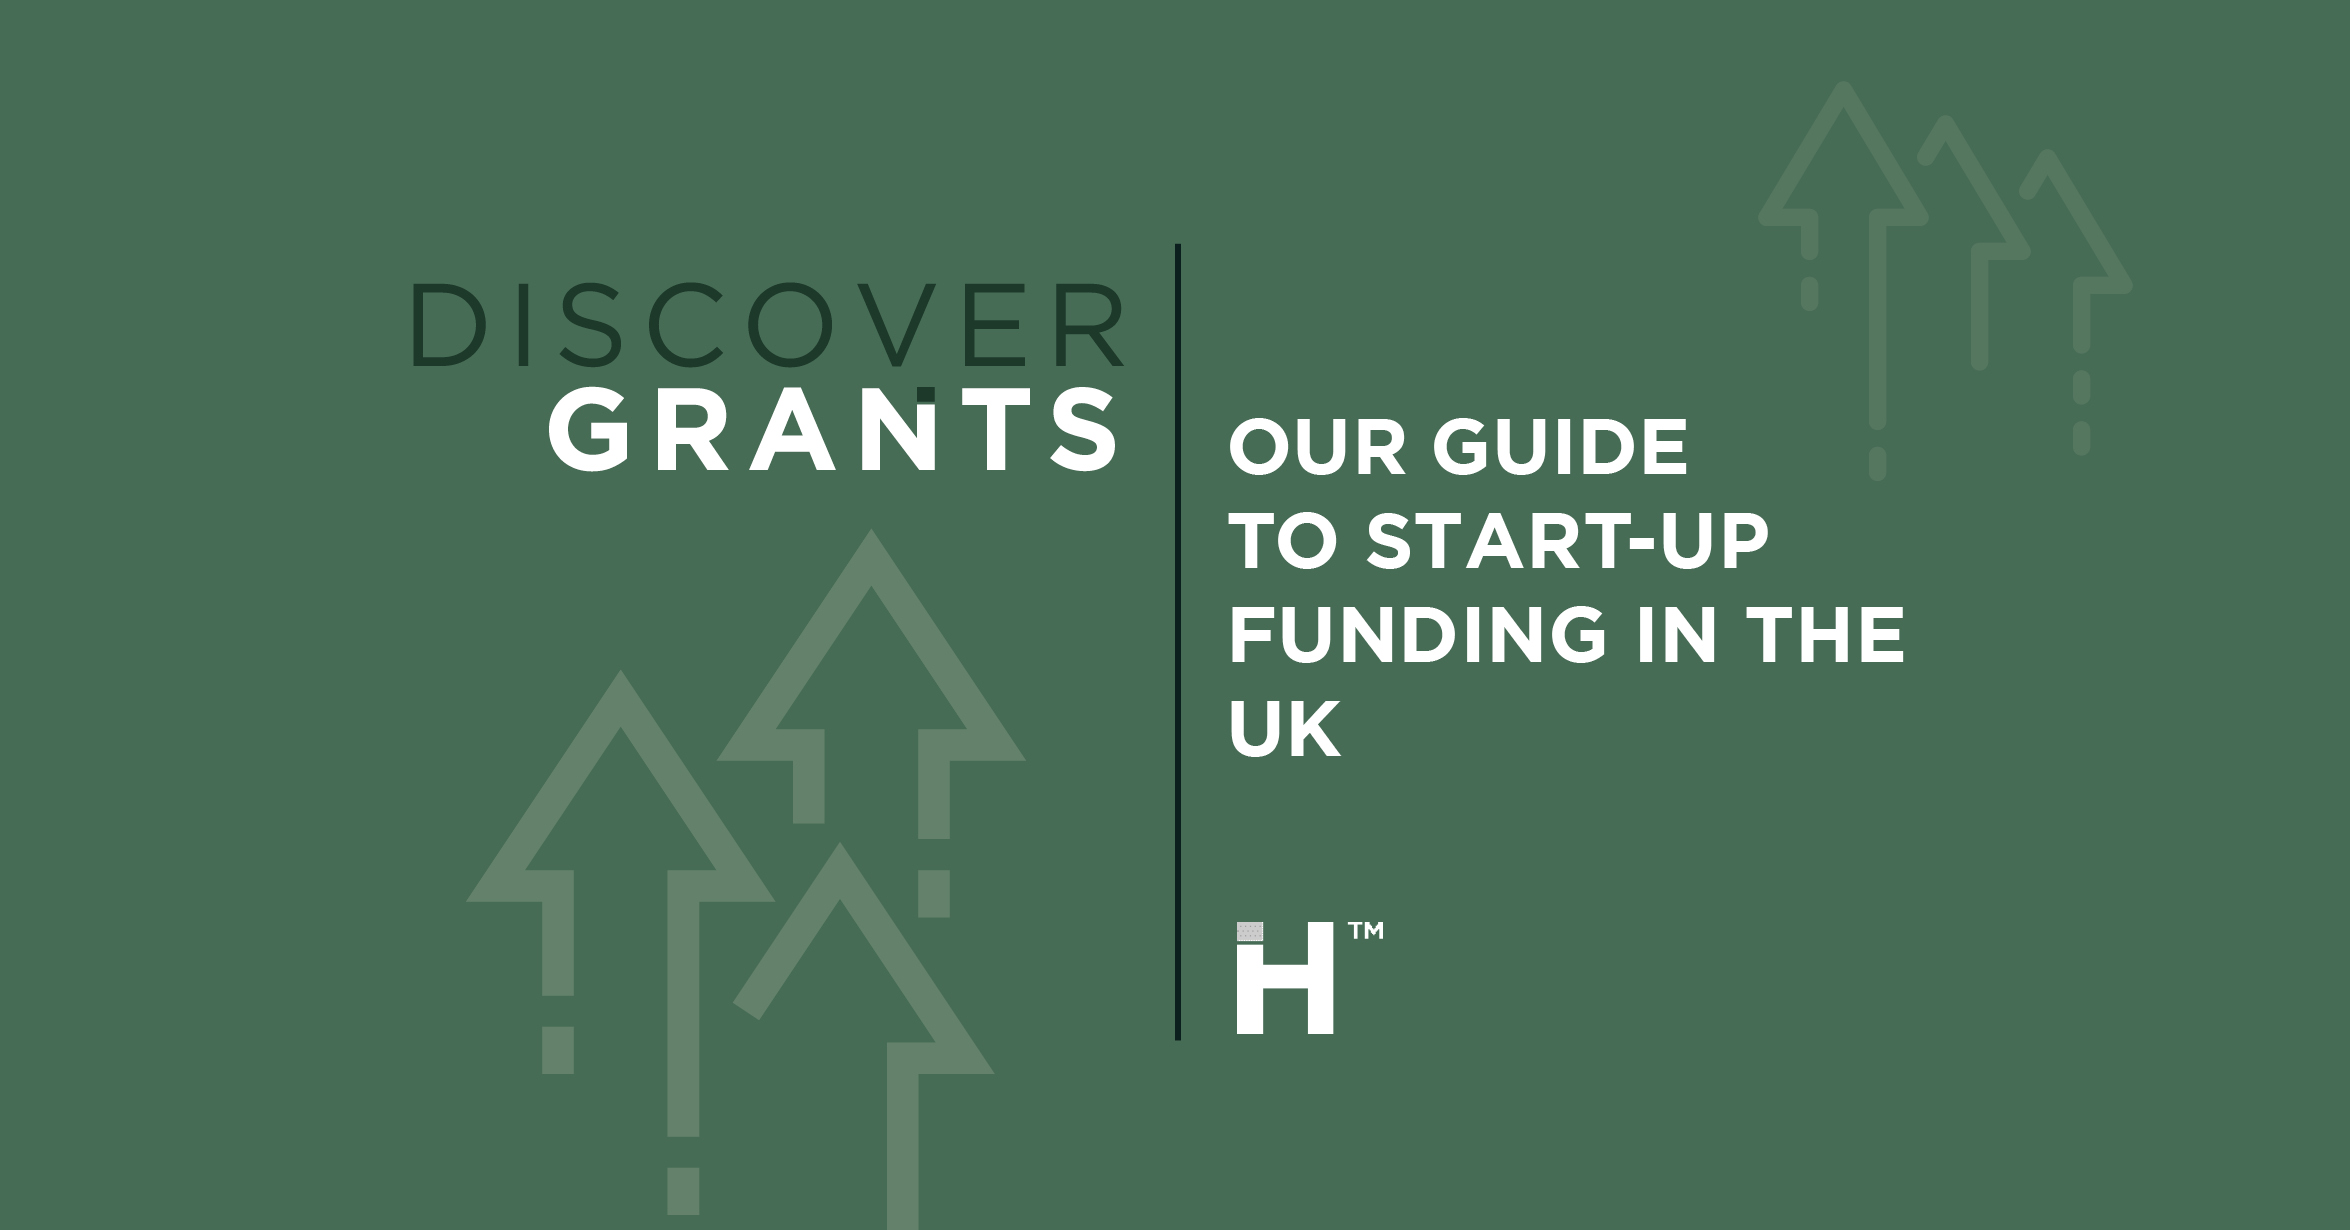 Our Guide to Start-Up Funding in the UK